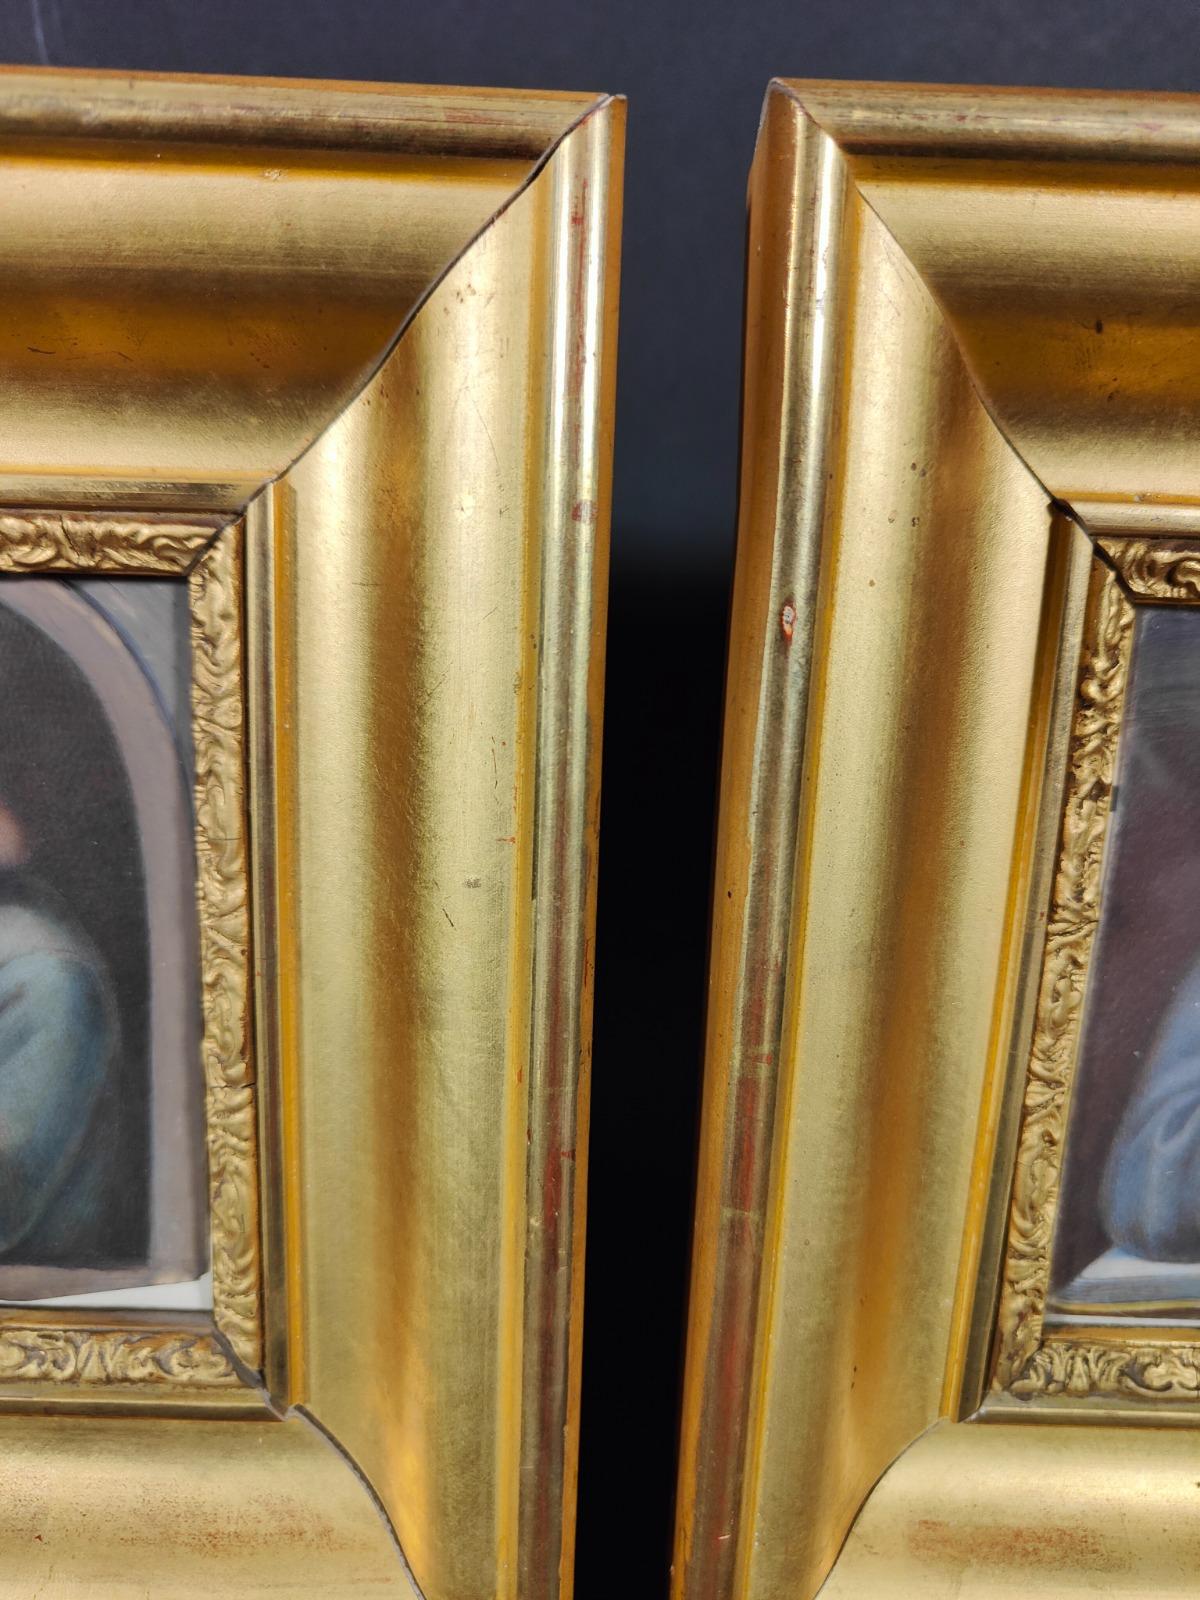 Pair of portraits on ivory. Old renascentist portraits on ivory plate with golden wooden frame. Each measures: 21x21 and 11x11 cm.
Good condition.